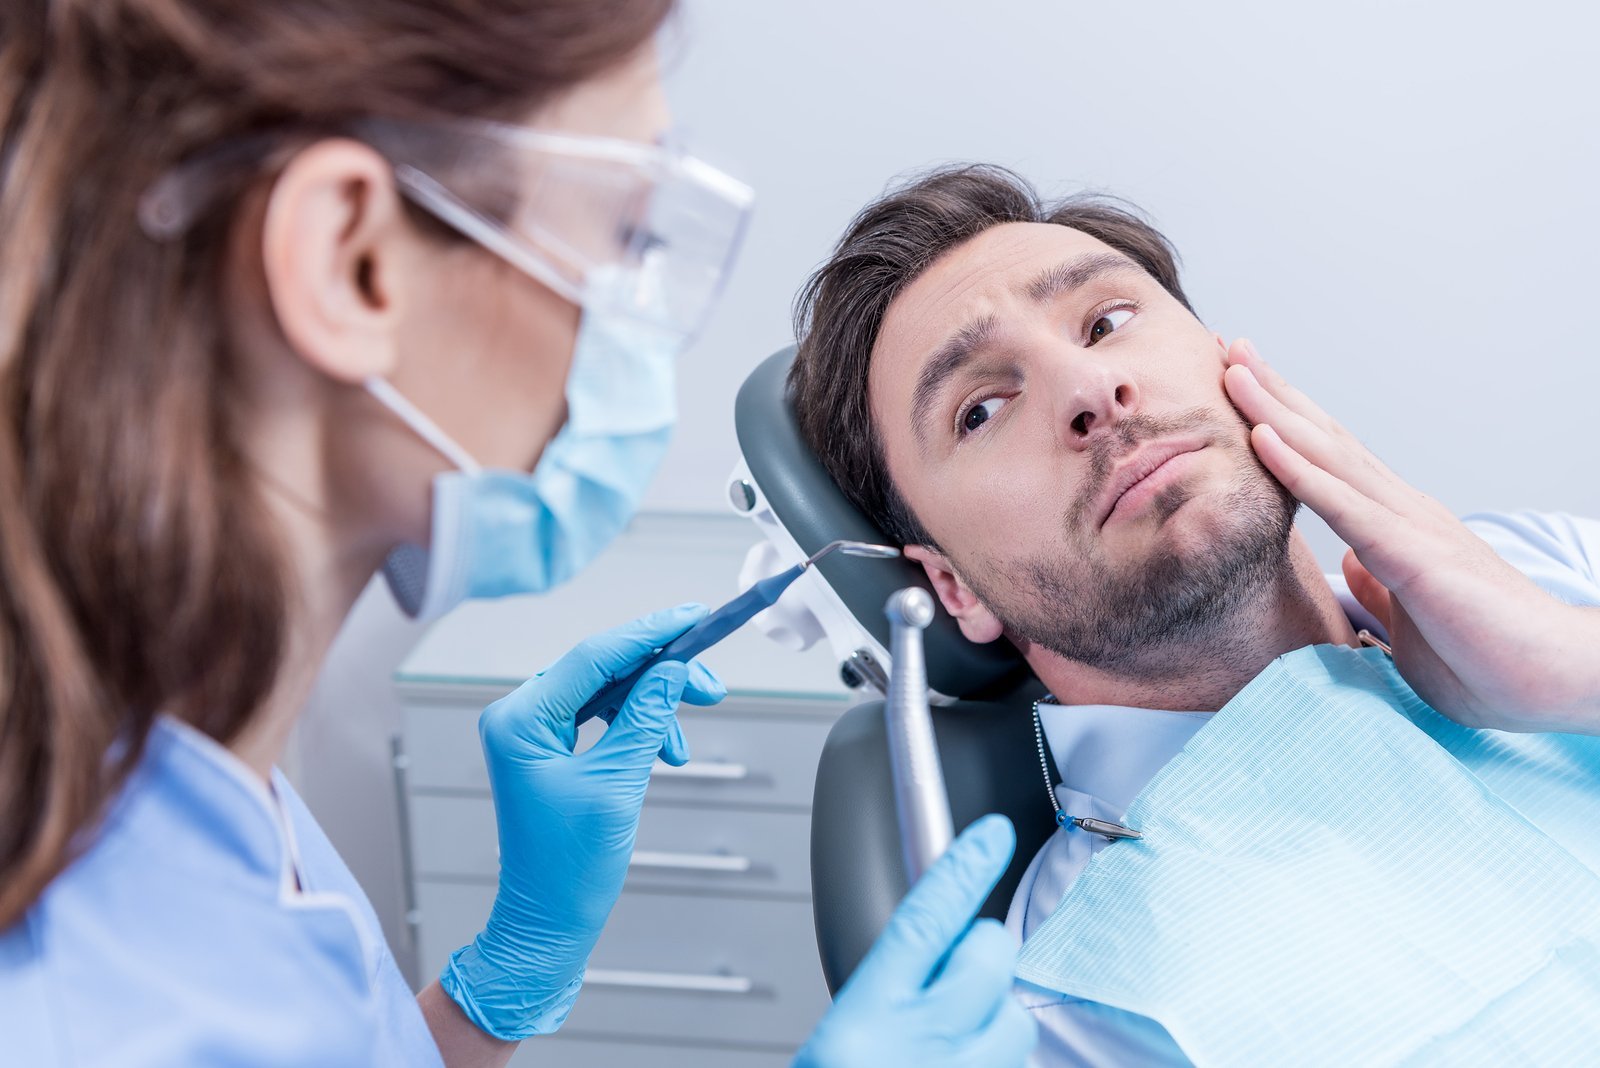 Featured image for “Dental Anxiety: Overcoming Your Fear of the Dentist”